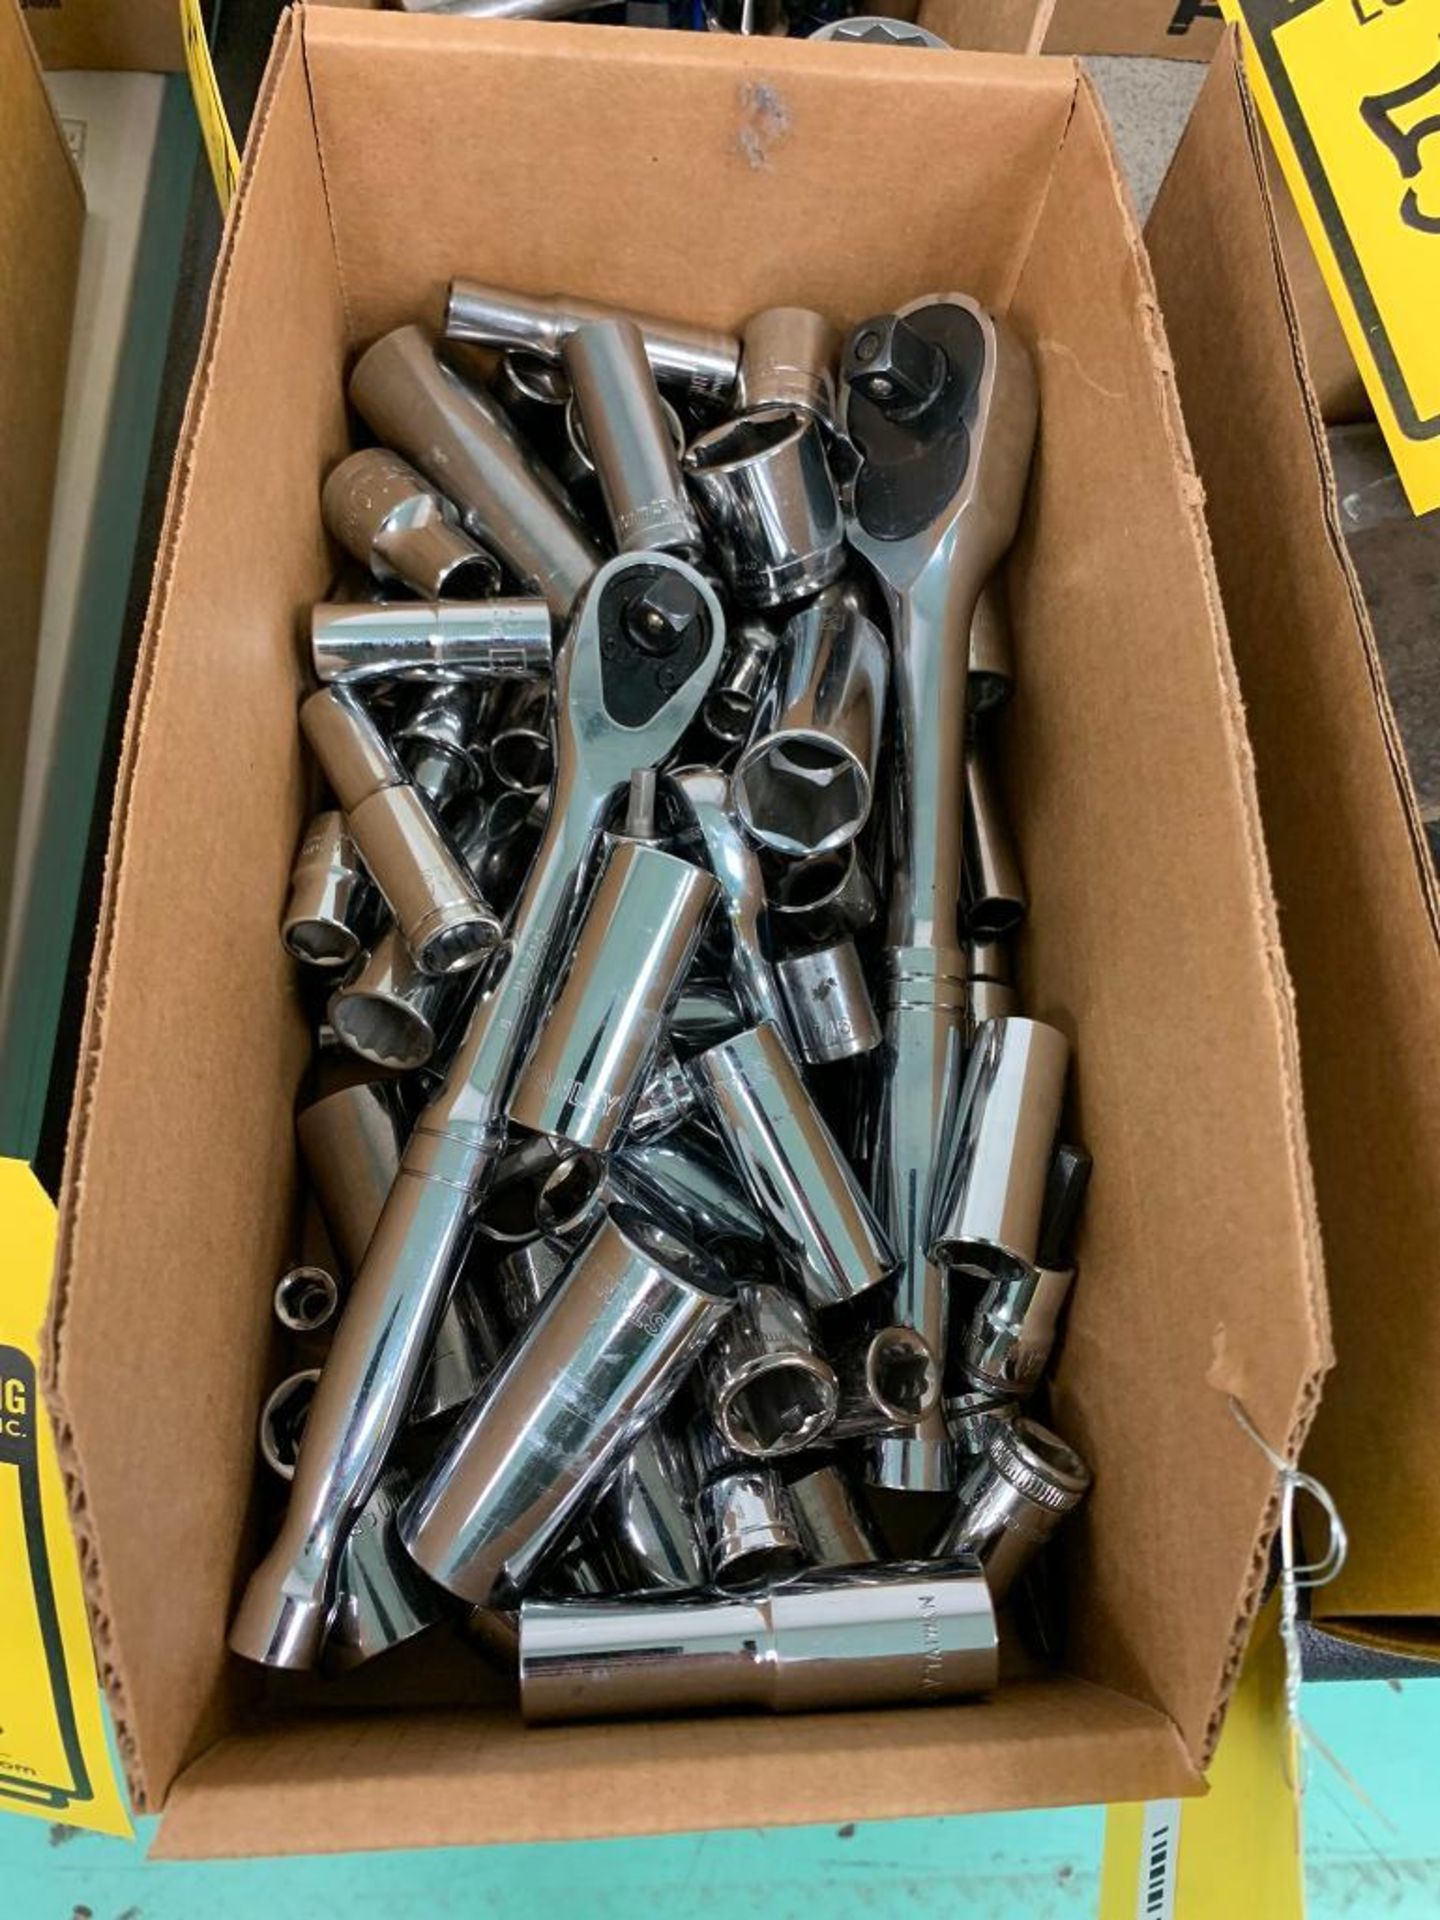 Box of Assorted Sockets, Ratchets